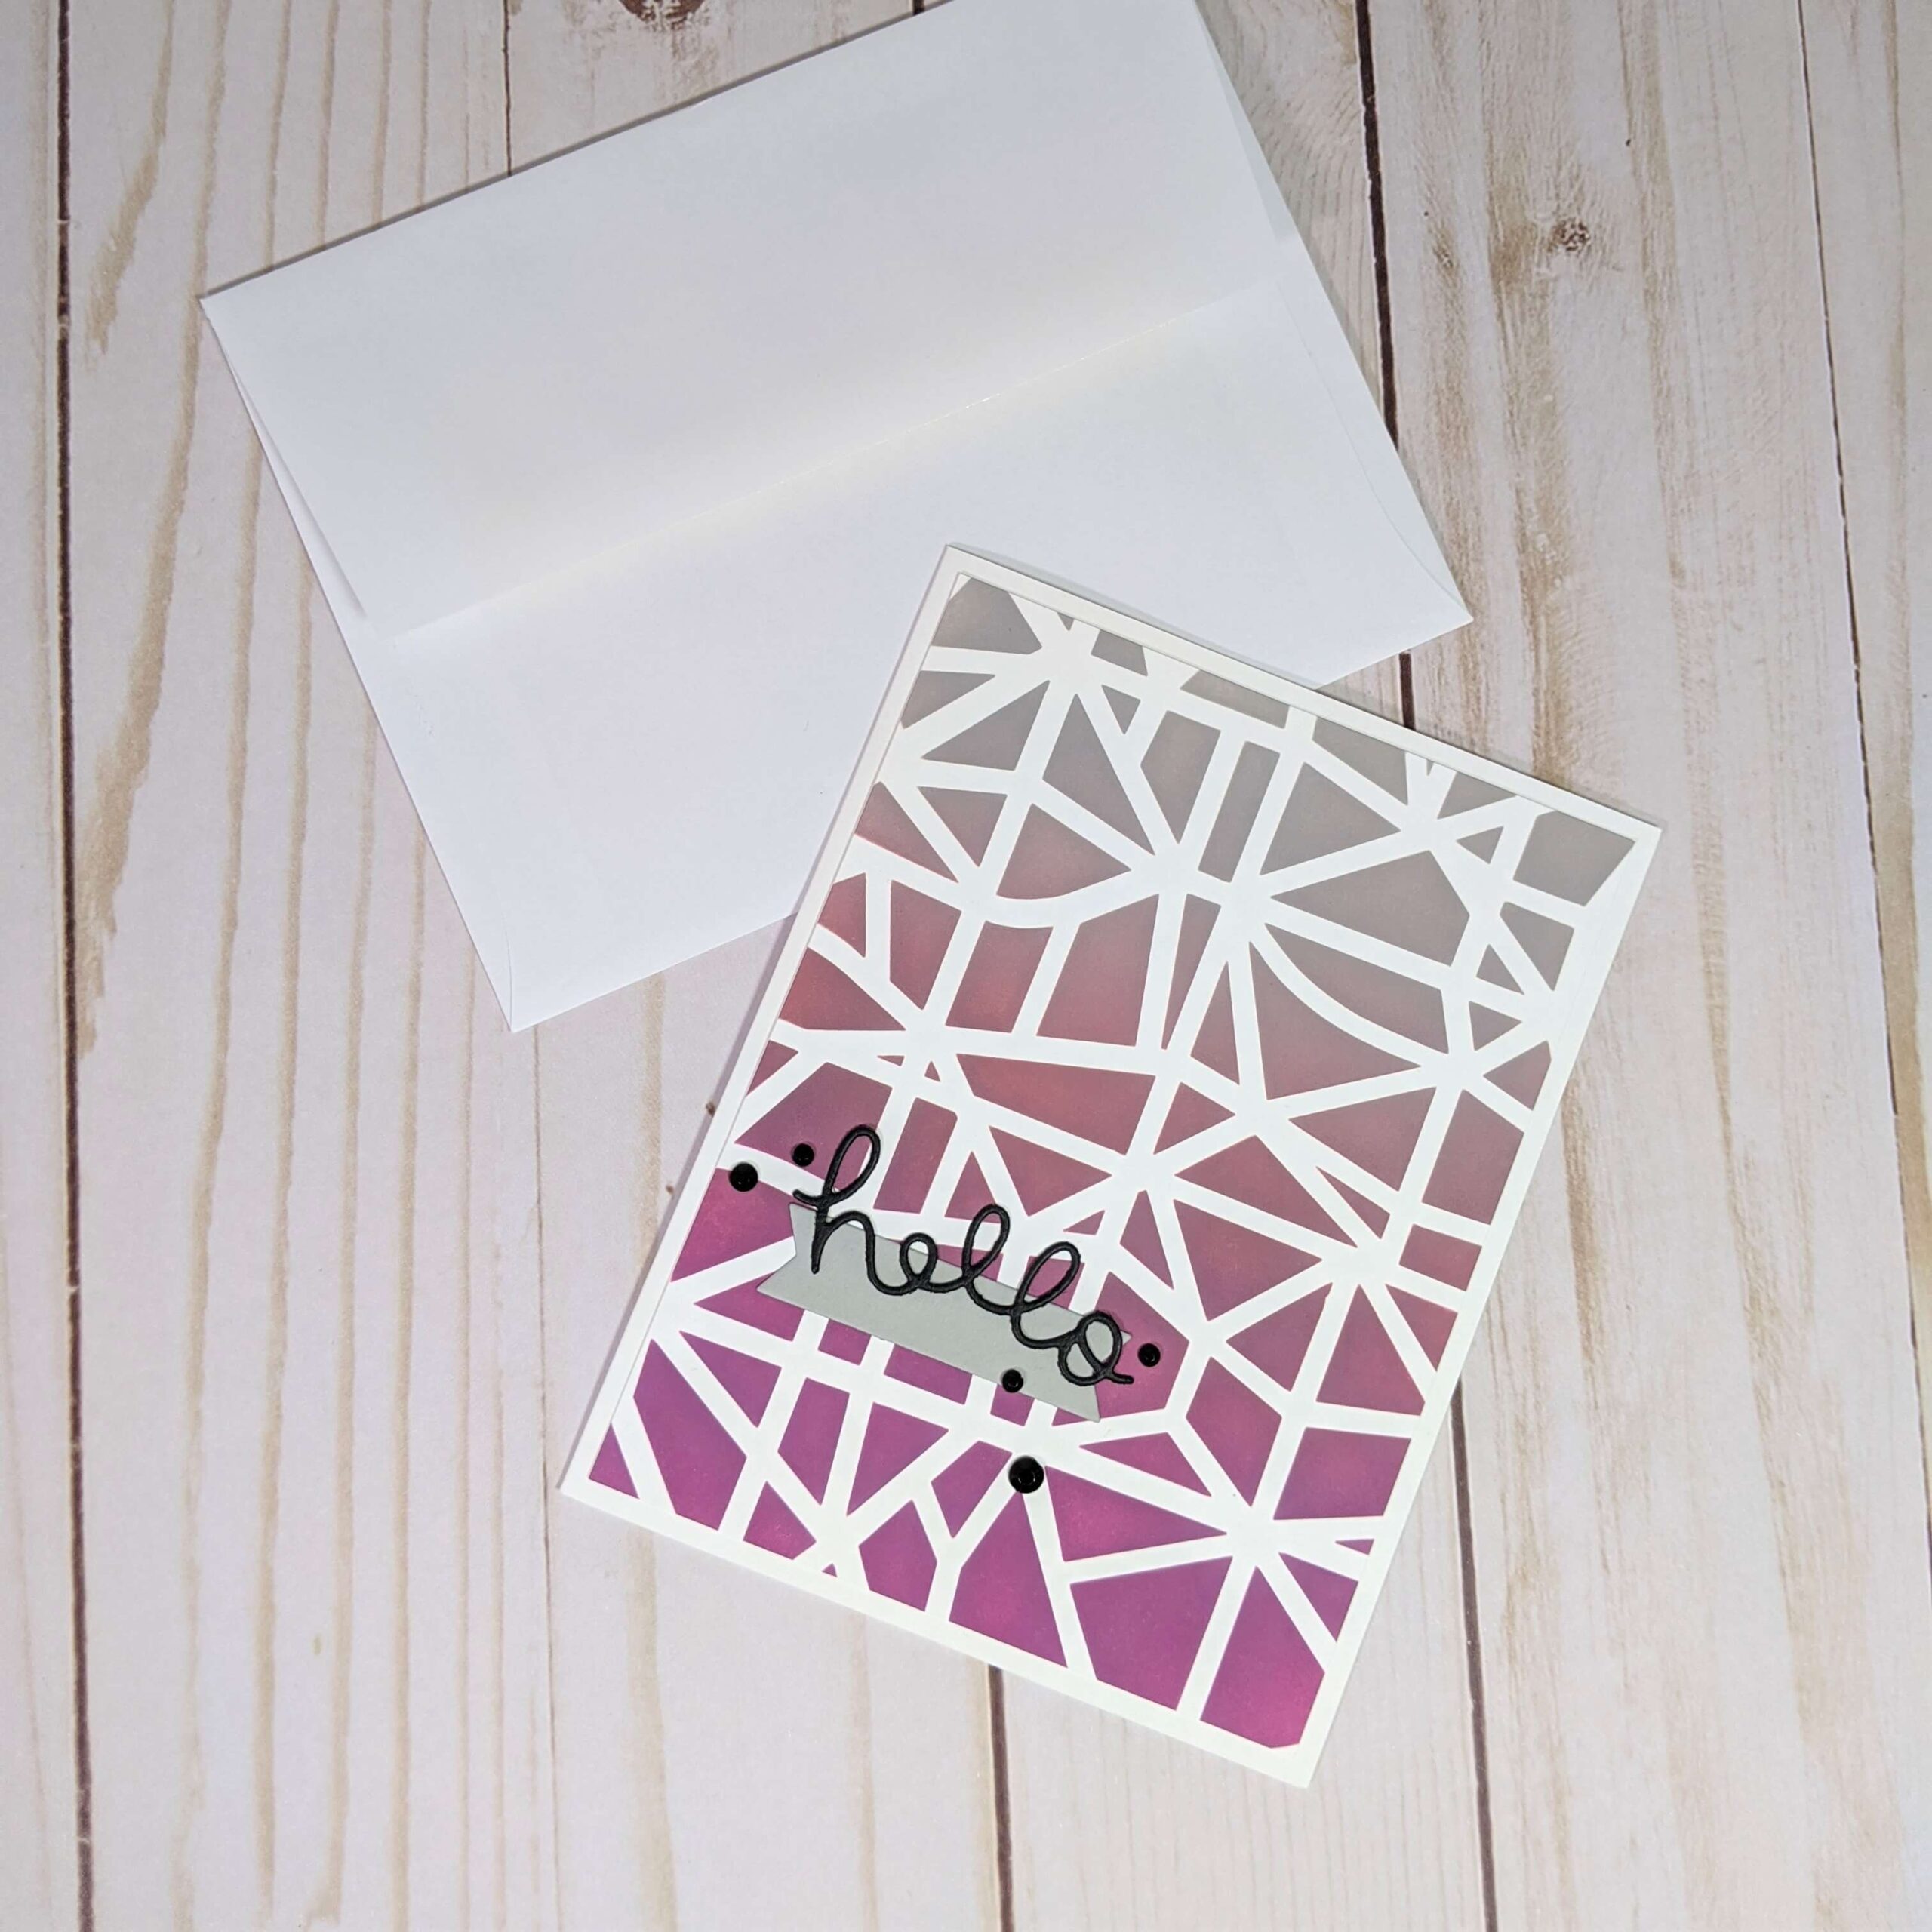 Distressed Hello masculine greeting card aerial